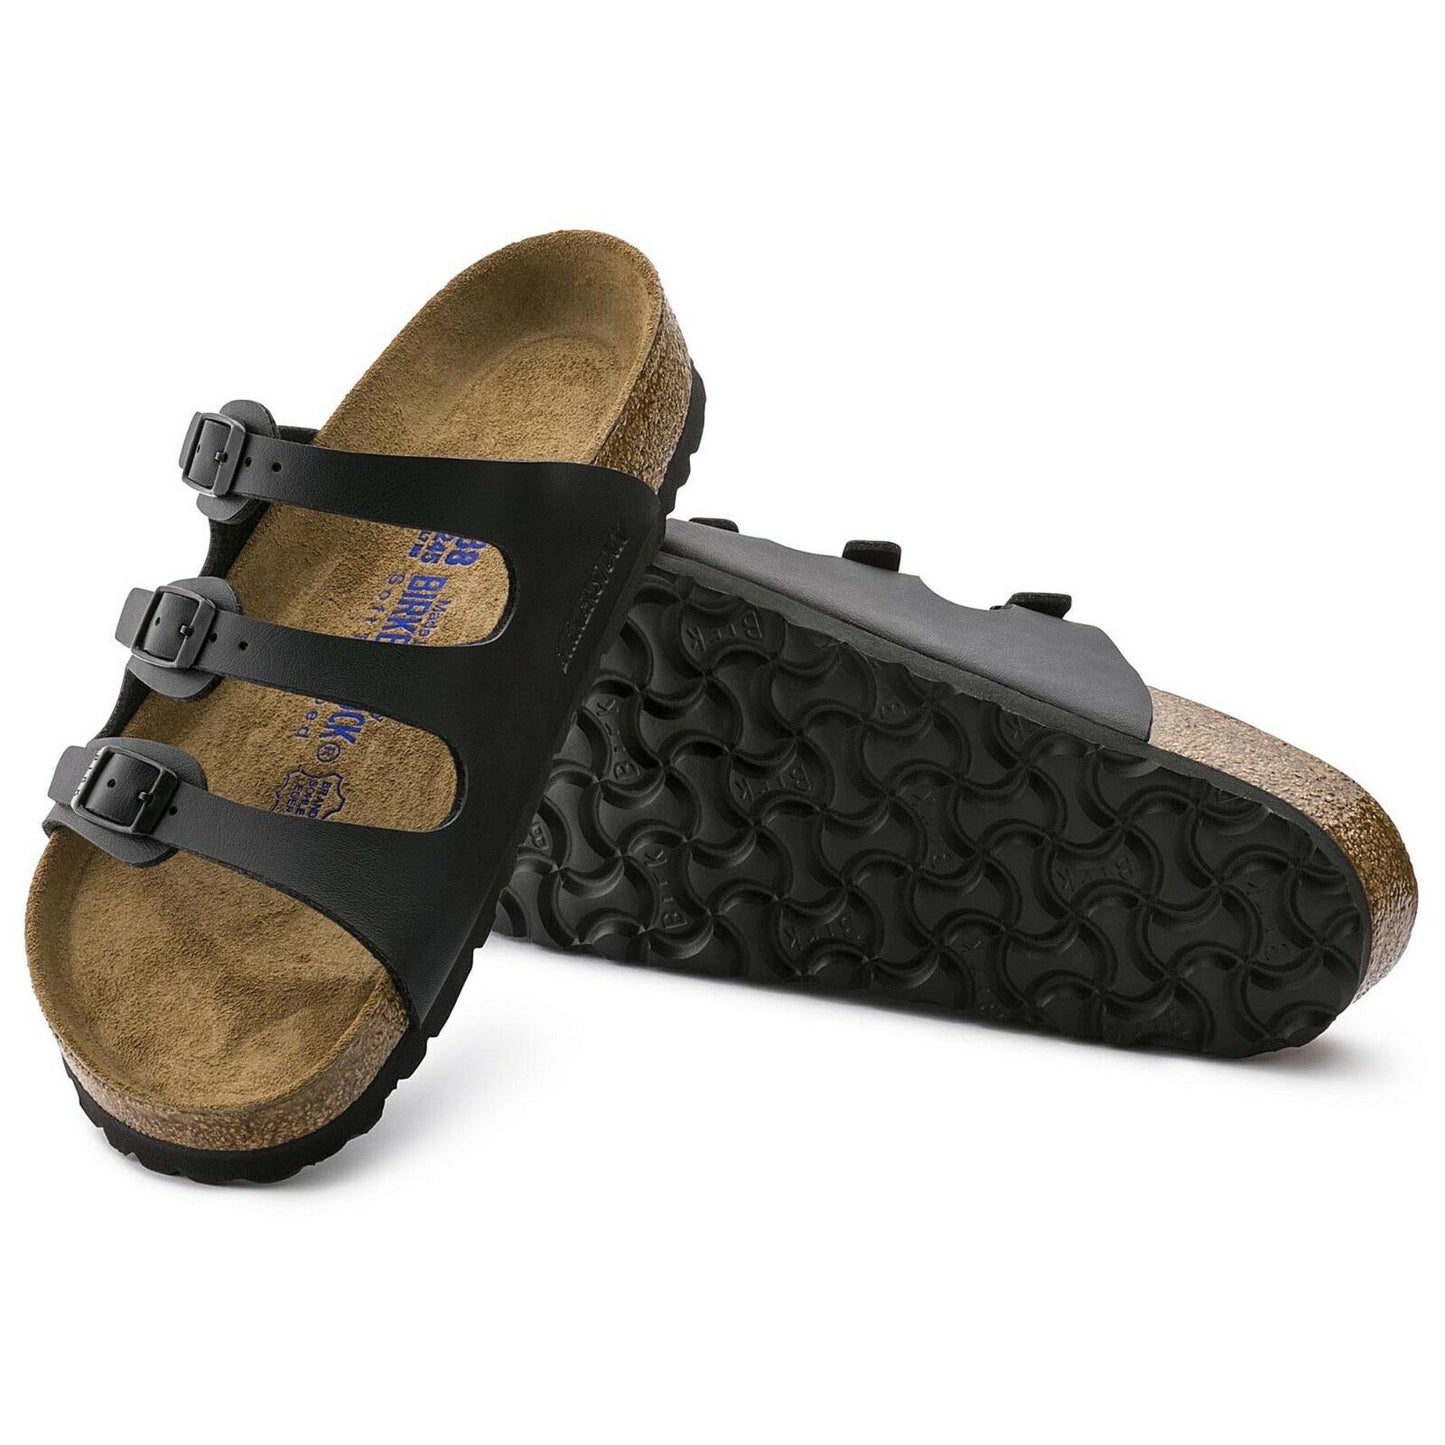 Birkenstock Florida Women's Black SoftFootbed Womens - All Mixed Up 